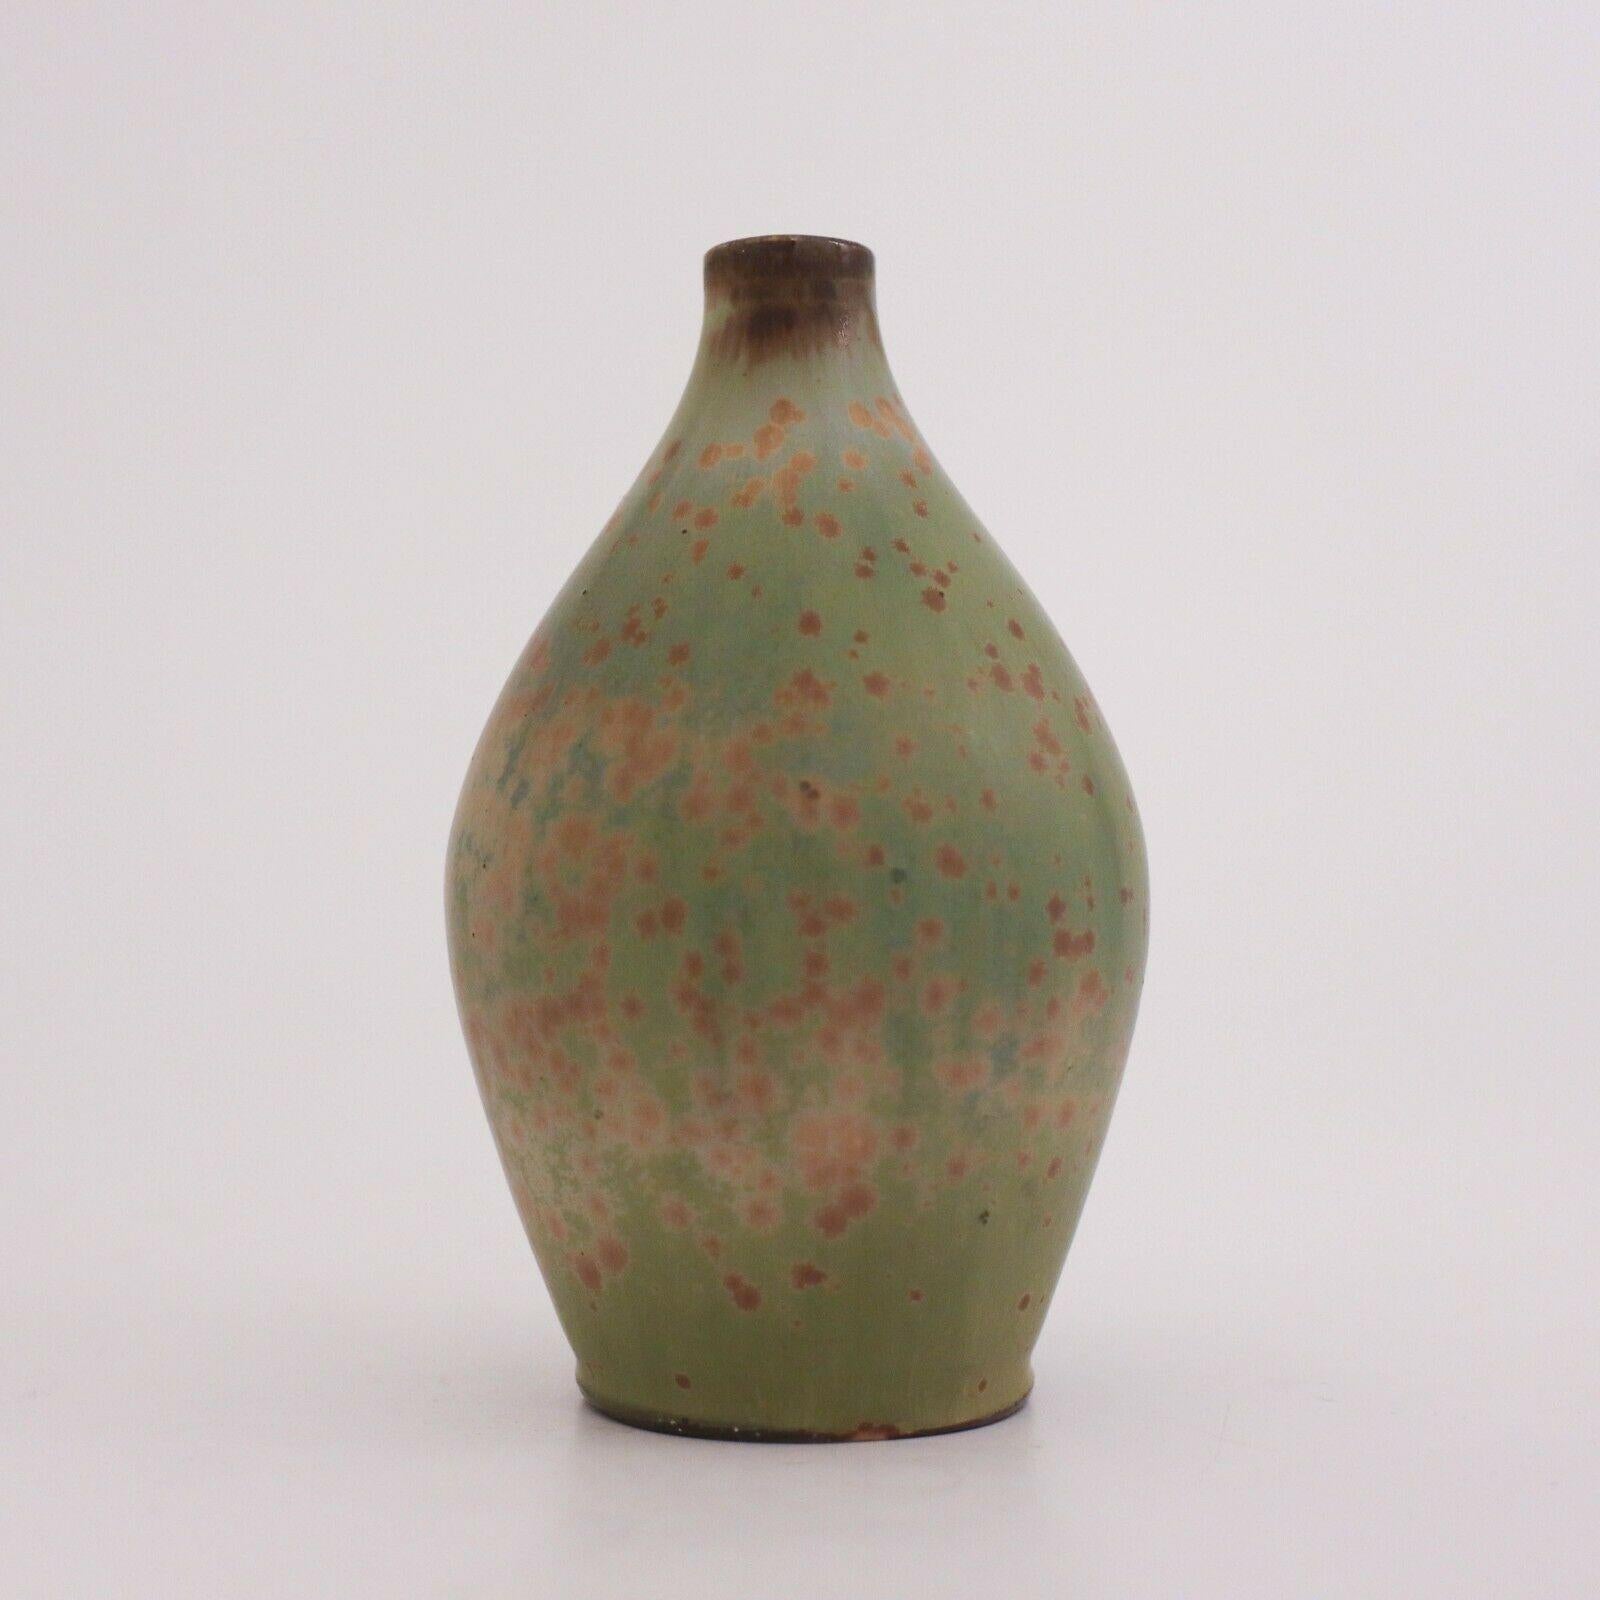 A vase designed by Gunnar Nylund at Rörstrand, the vase is 10.5 cm high and it is in very good condition except from some minor marks.

Gunnar Nylund was born in Paris 1904 with parents who worked as sculptors and designer so he really soon started